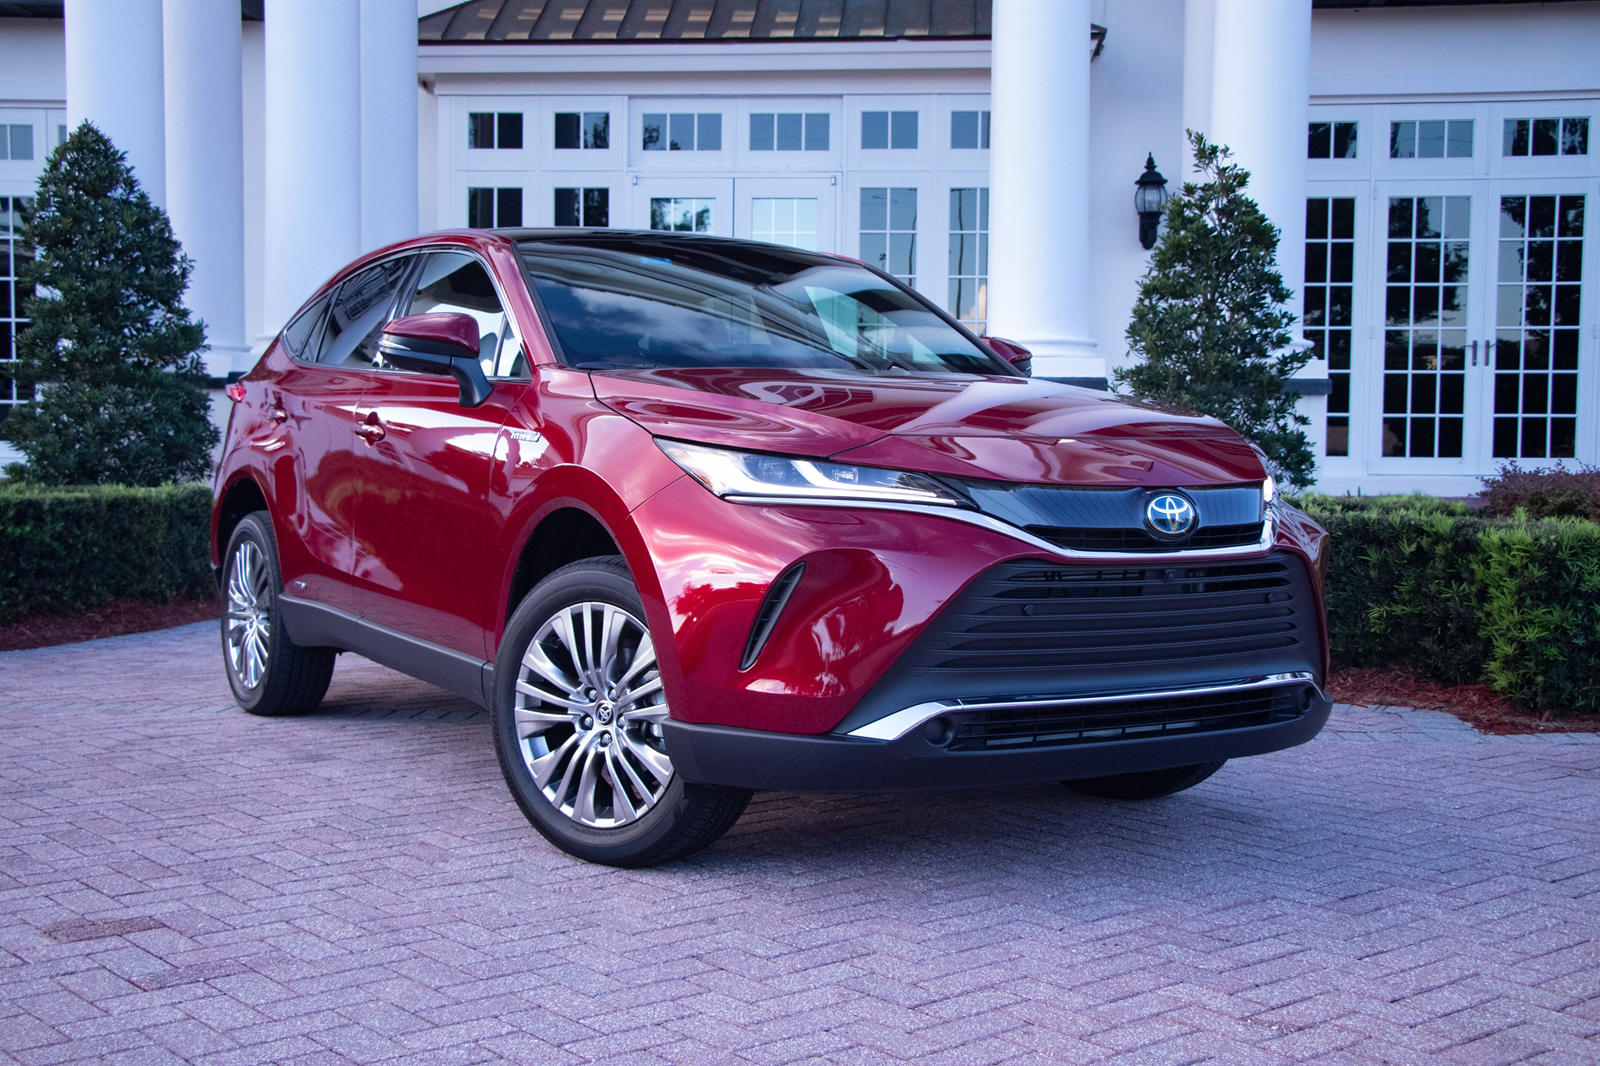 2021 Toyota Venza: Review, Trims, Specs, Price, New Interior Features